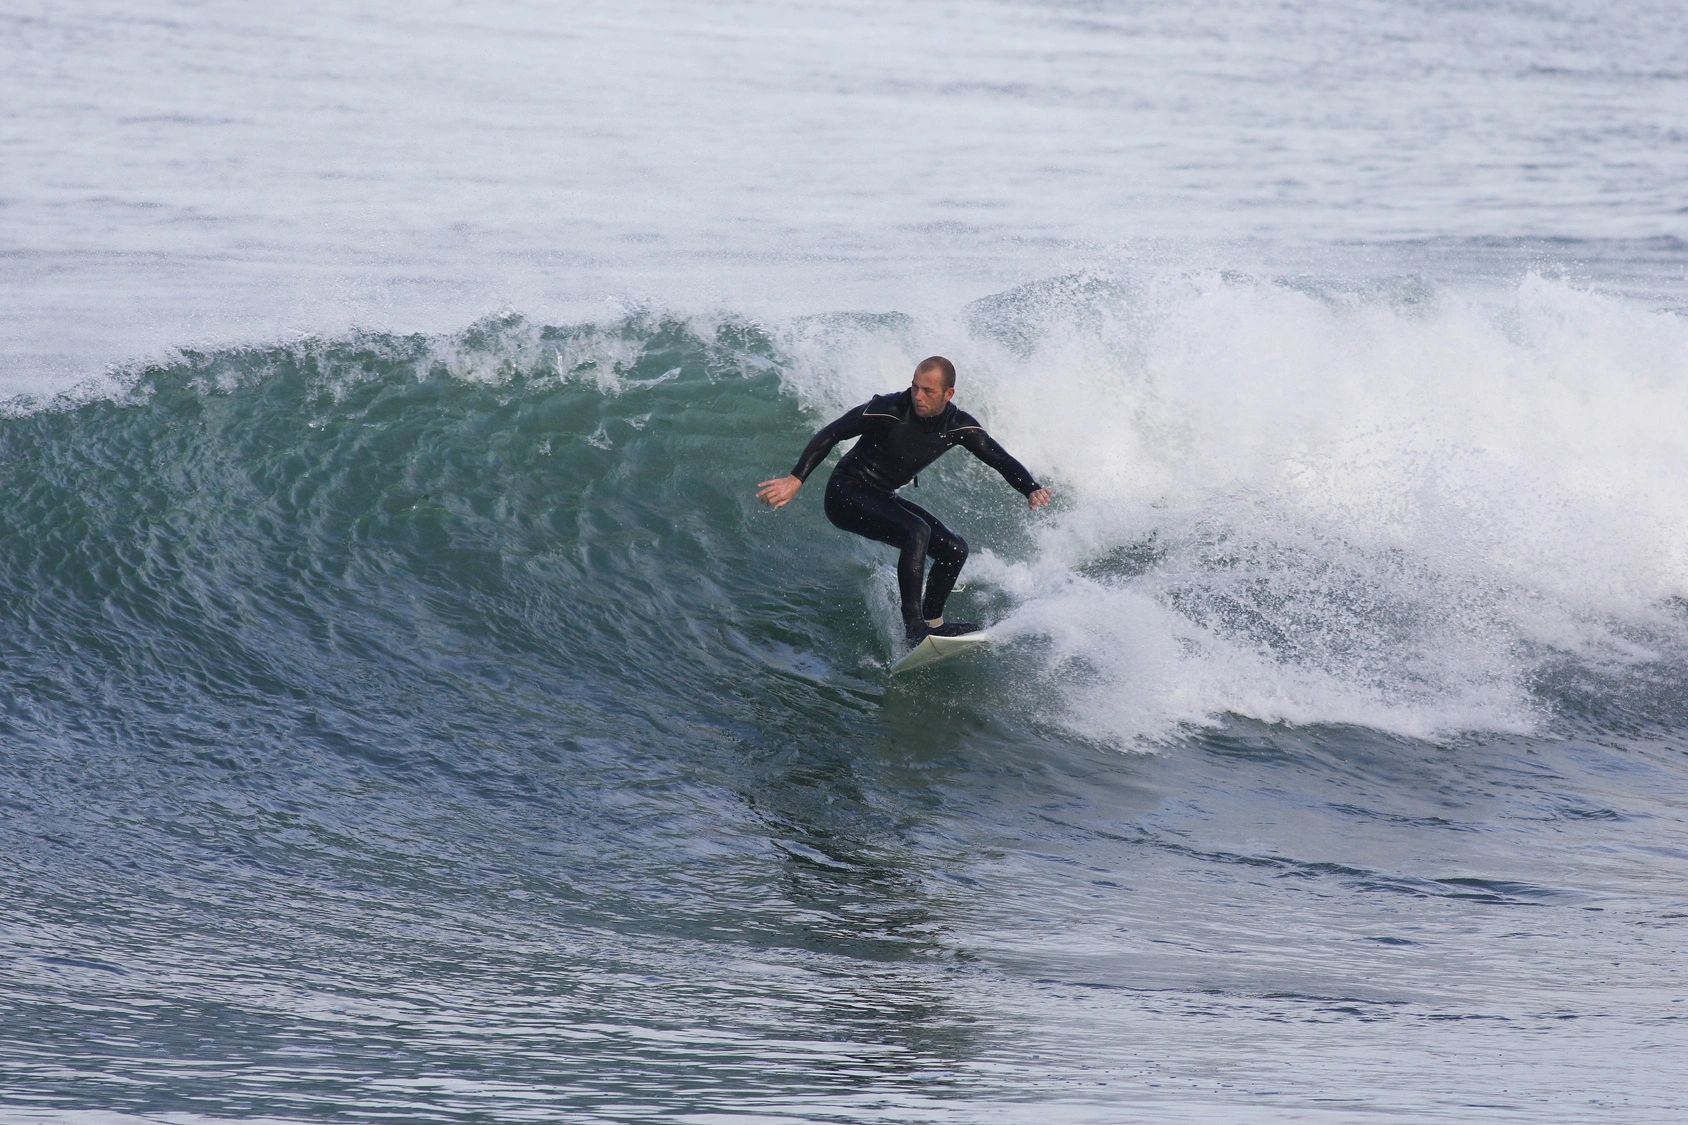 When looking where to buy cbd in Santa Cruz, the surfers riding waves are a tell tale sign.